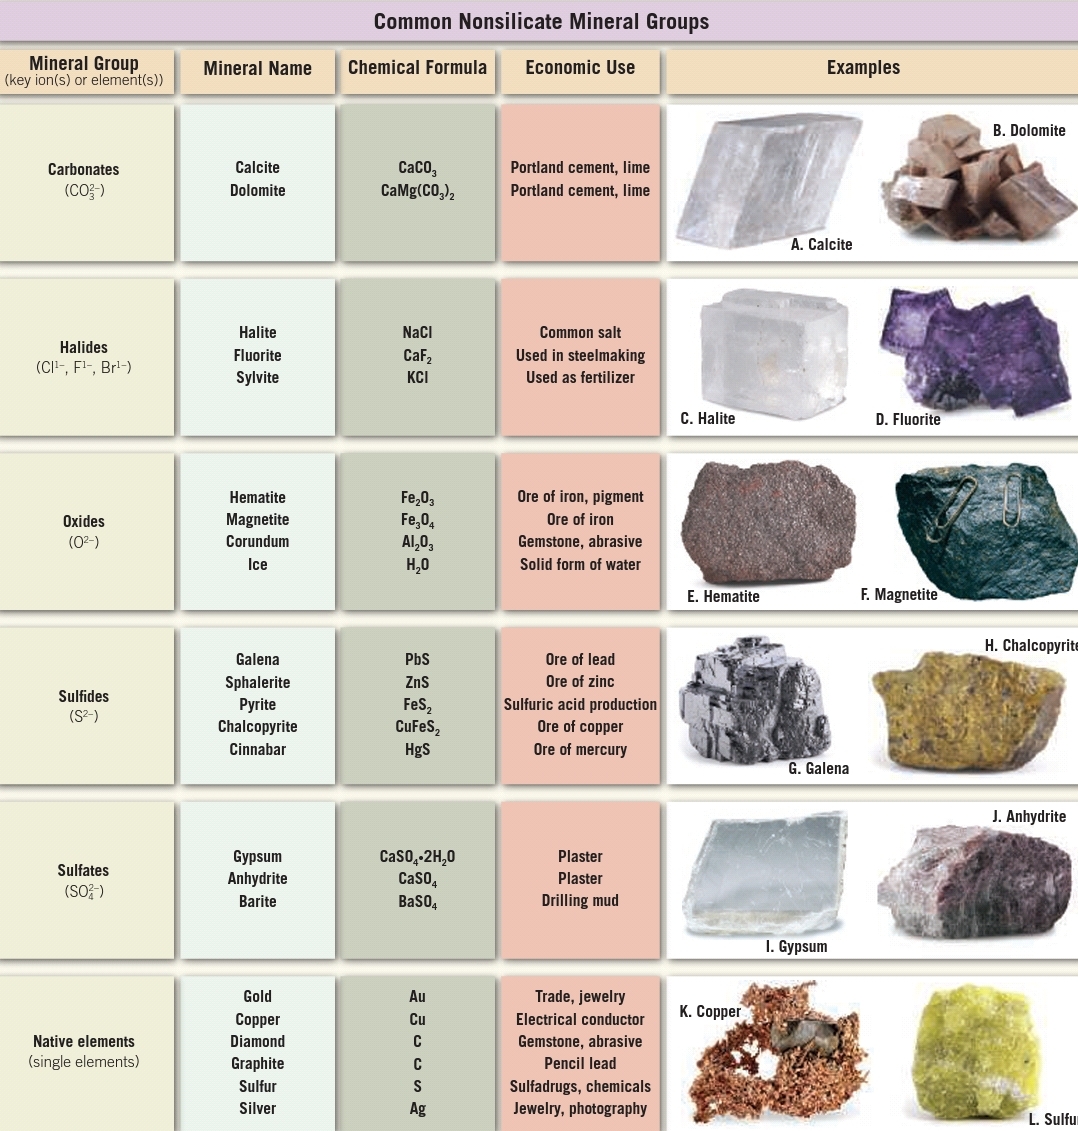 two major groups of minerals